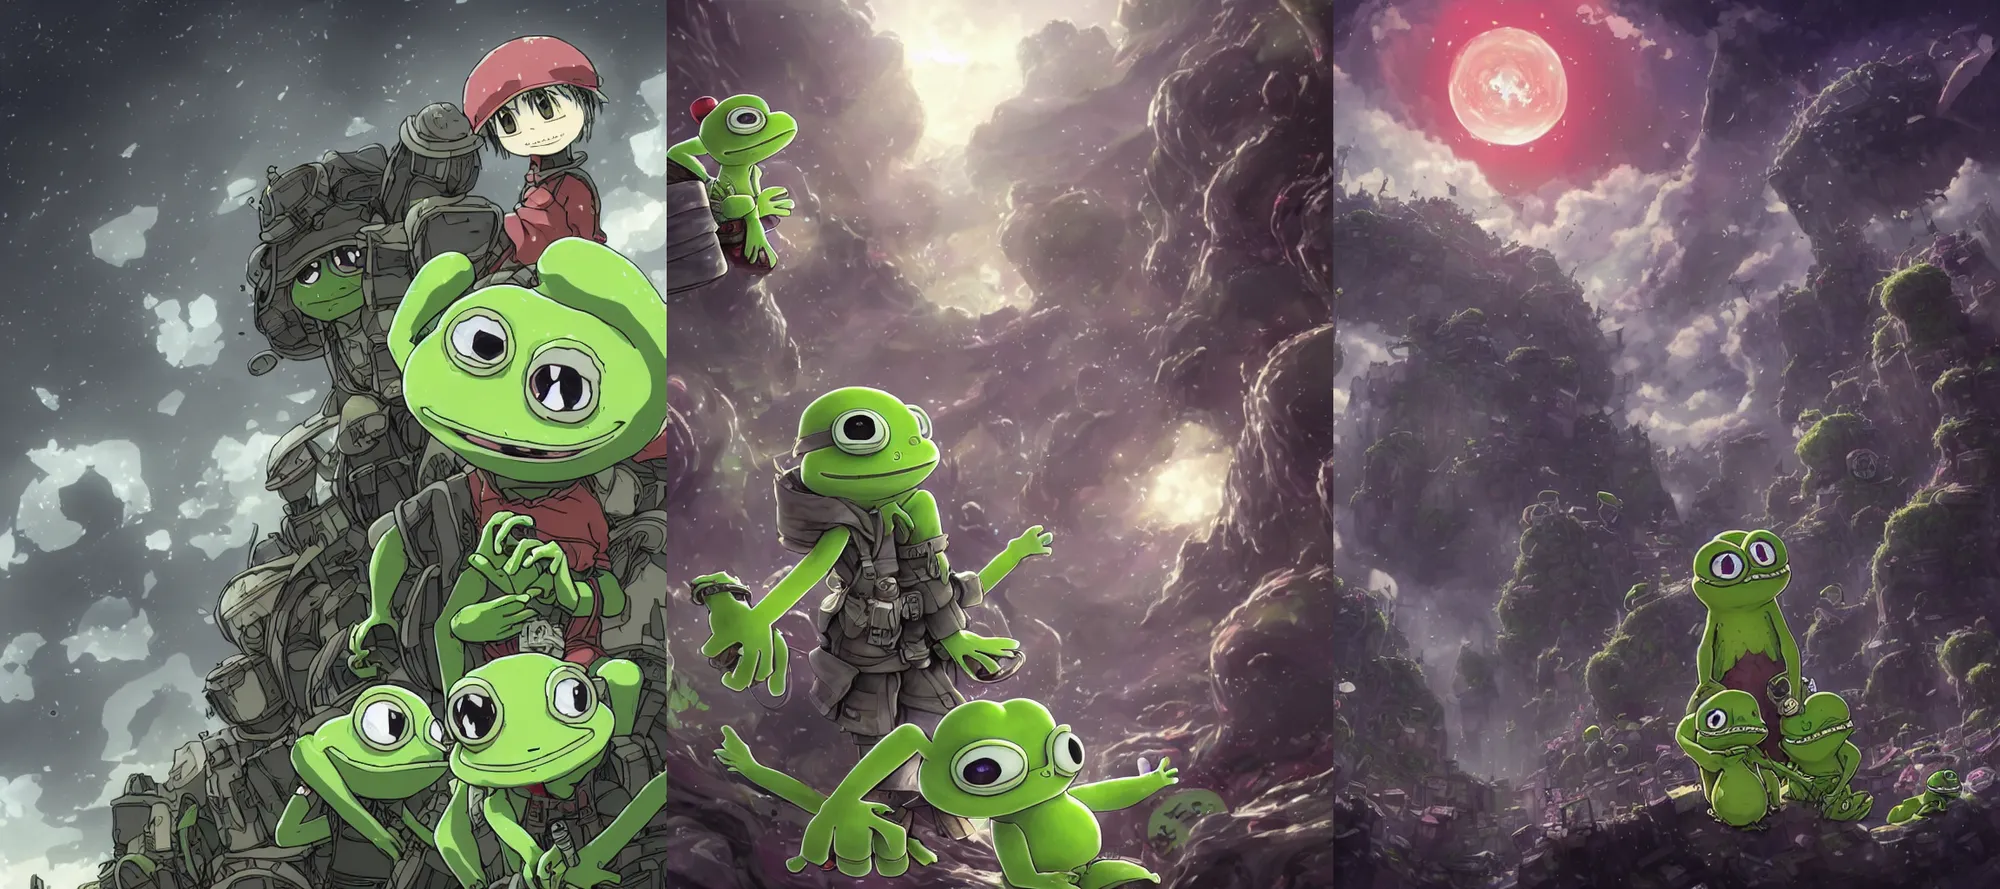 Prompt: resolution 4k worlds of loss and depression made in abyss design Akihito Tsukushi design body pepe the frog group of them attacking a monster war , battlefield darkness military drummer boy pepe , desolated city the sky is filled with red halos over each of their heads ivory dream like storybooks, fractals , pepe the frogs at war, art in the style of and Oleg Vdovenko and Akihito Tsukushi ,Stefan Koidl